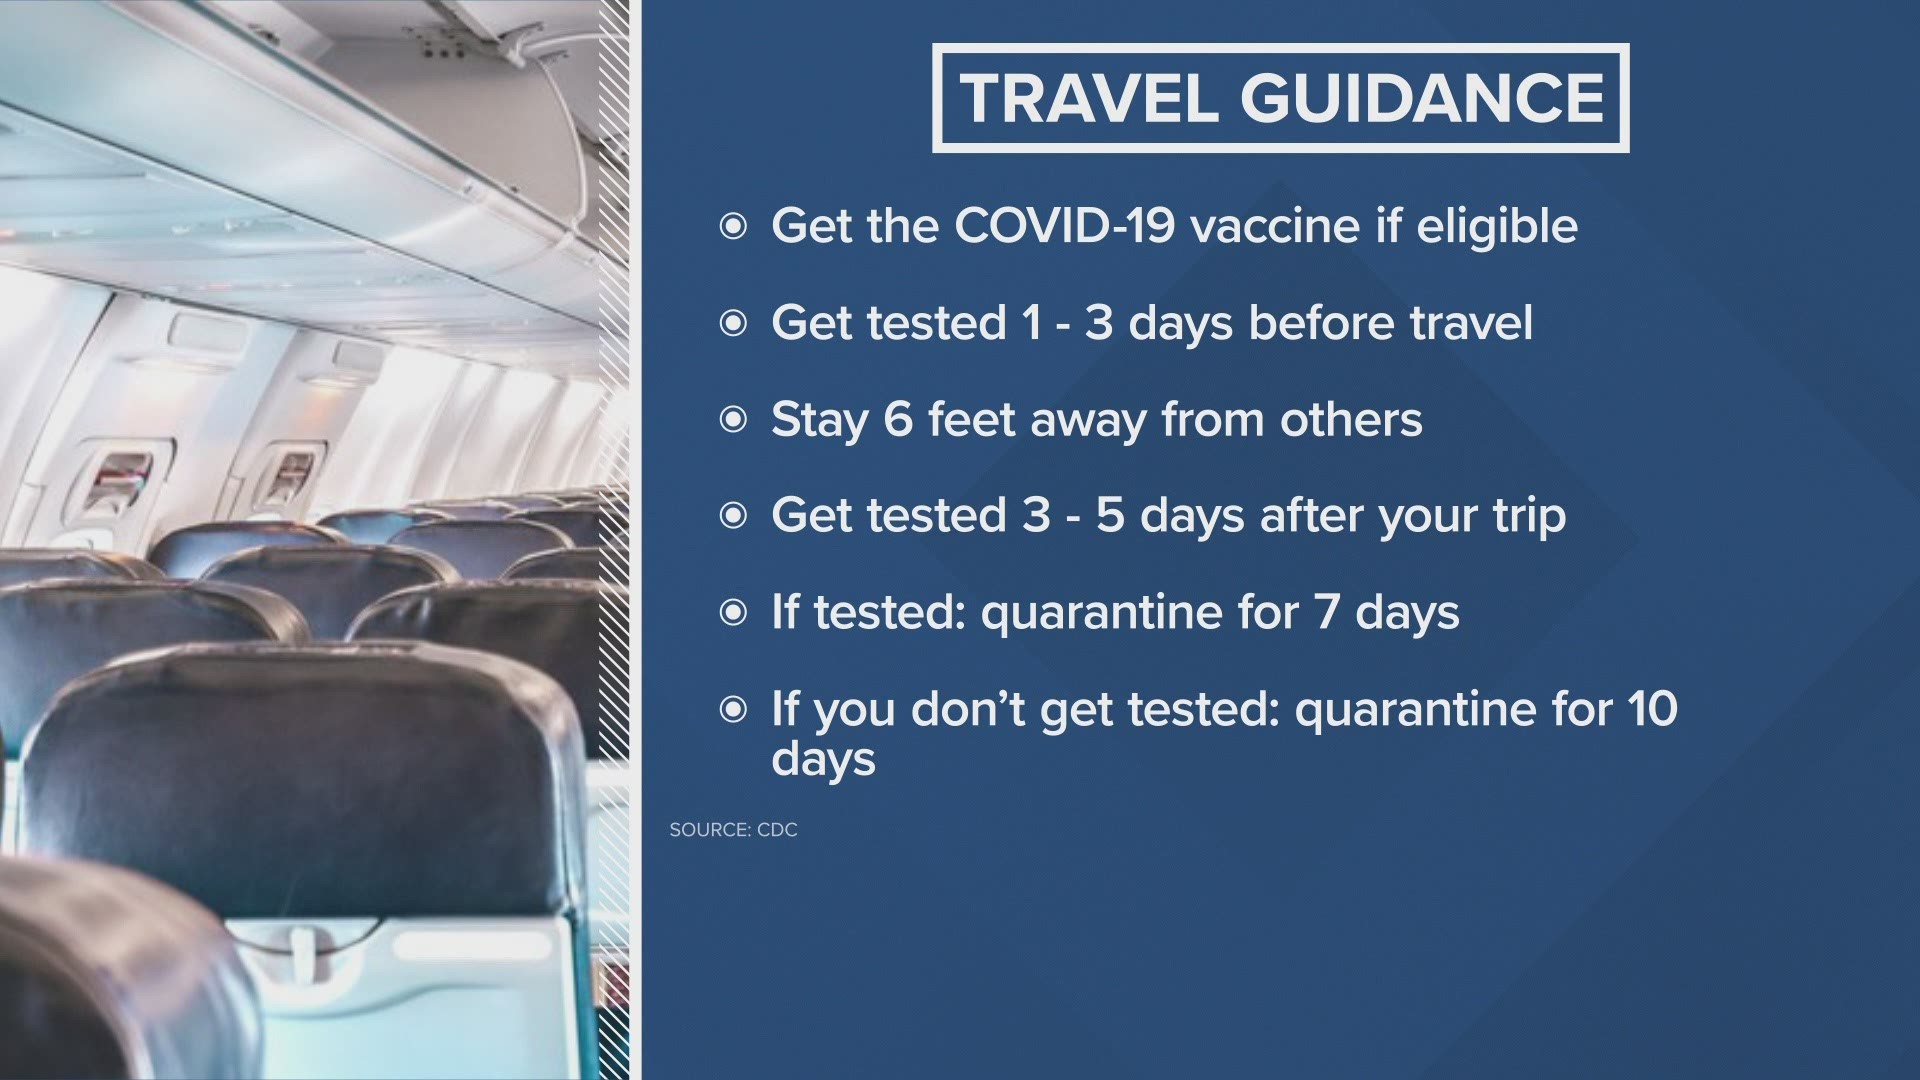 Gov. Jay Inslee says those traveling to and from Washington must comply with the CDC's travel guidance.